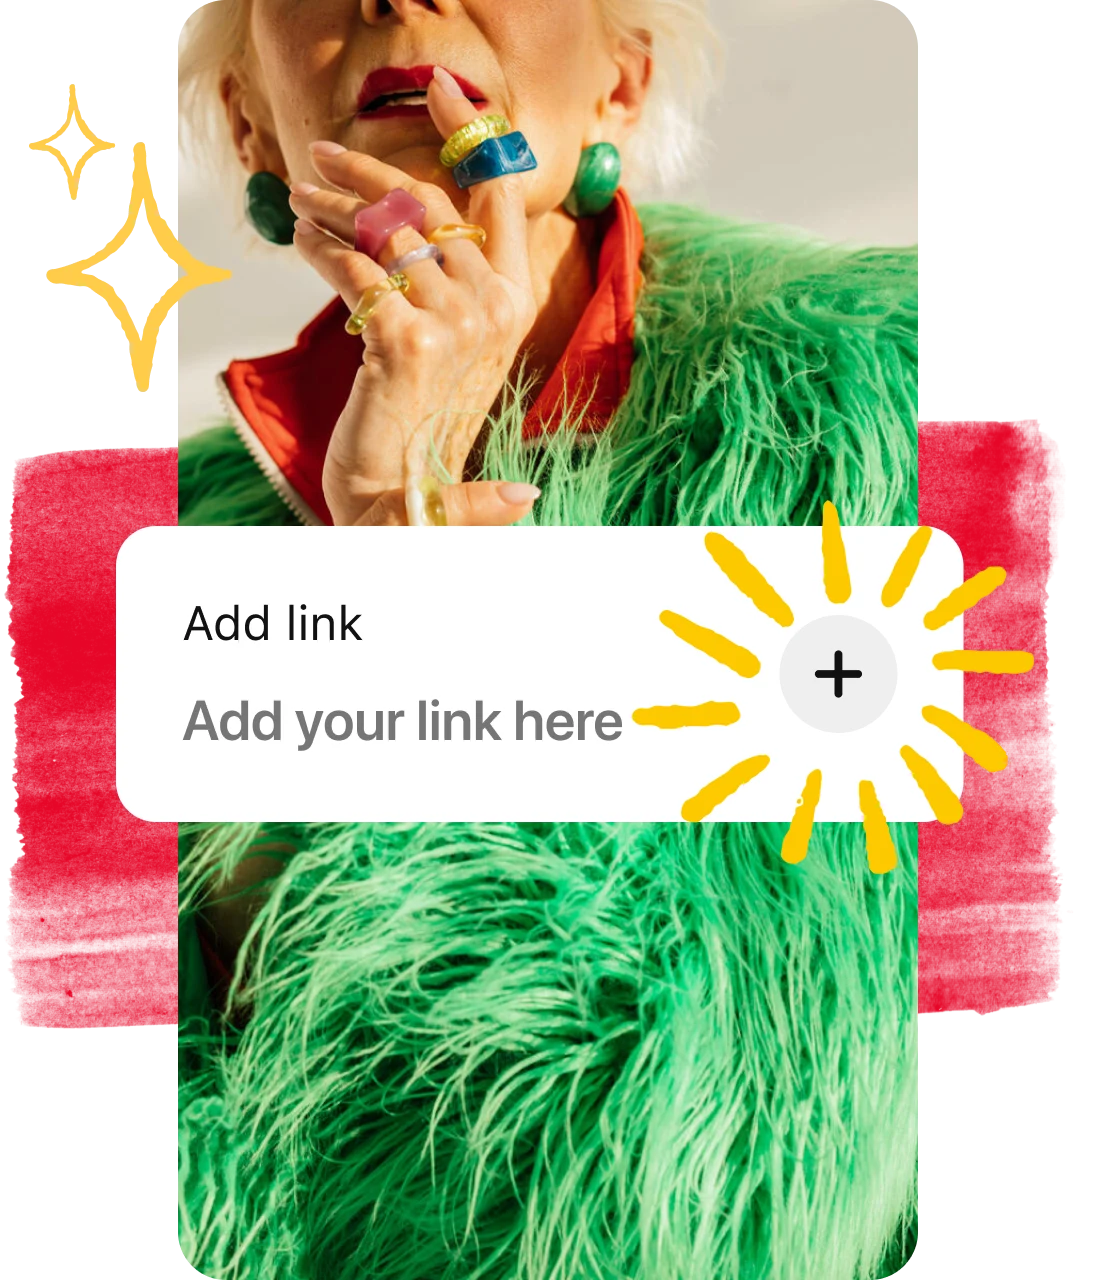 An ‘Add your link’ button is overlaid on a Pin of a woman in a green fur coat